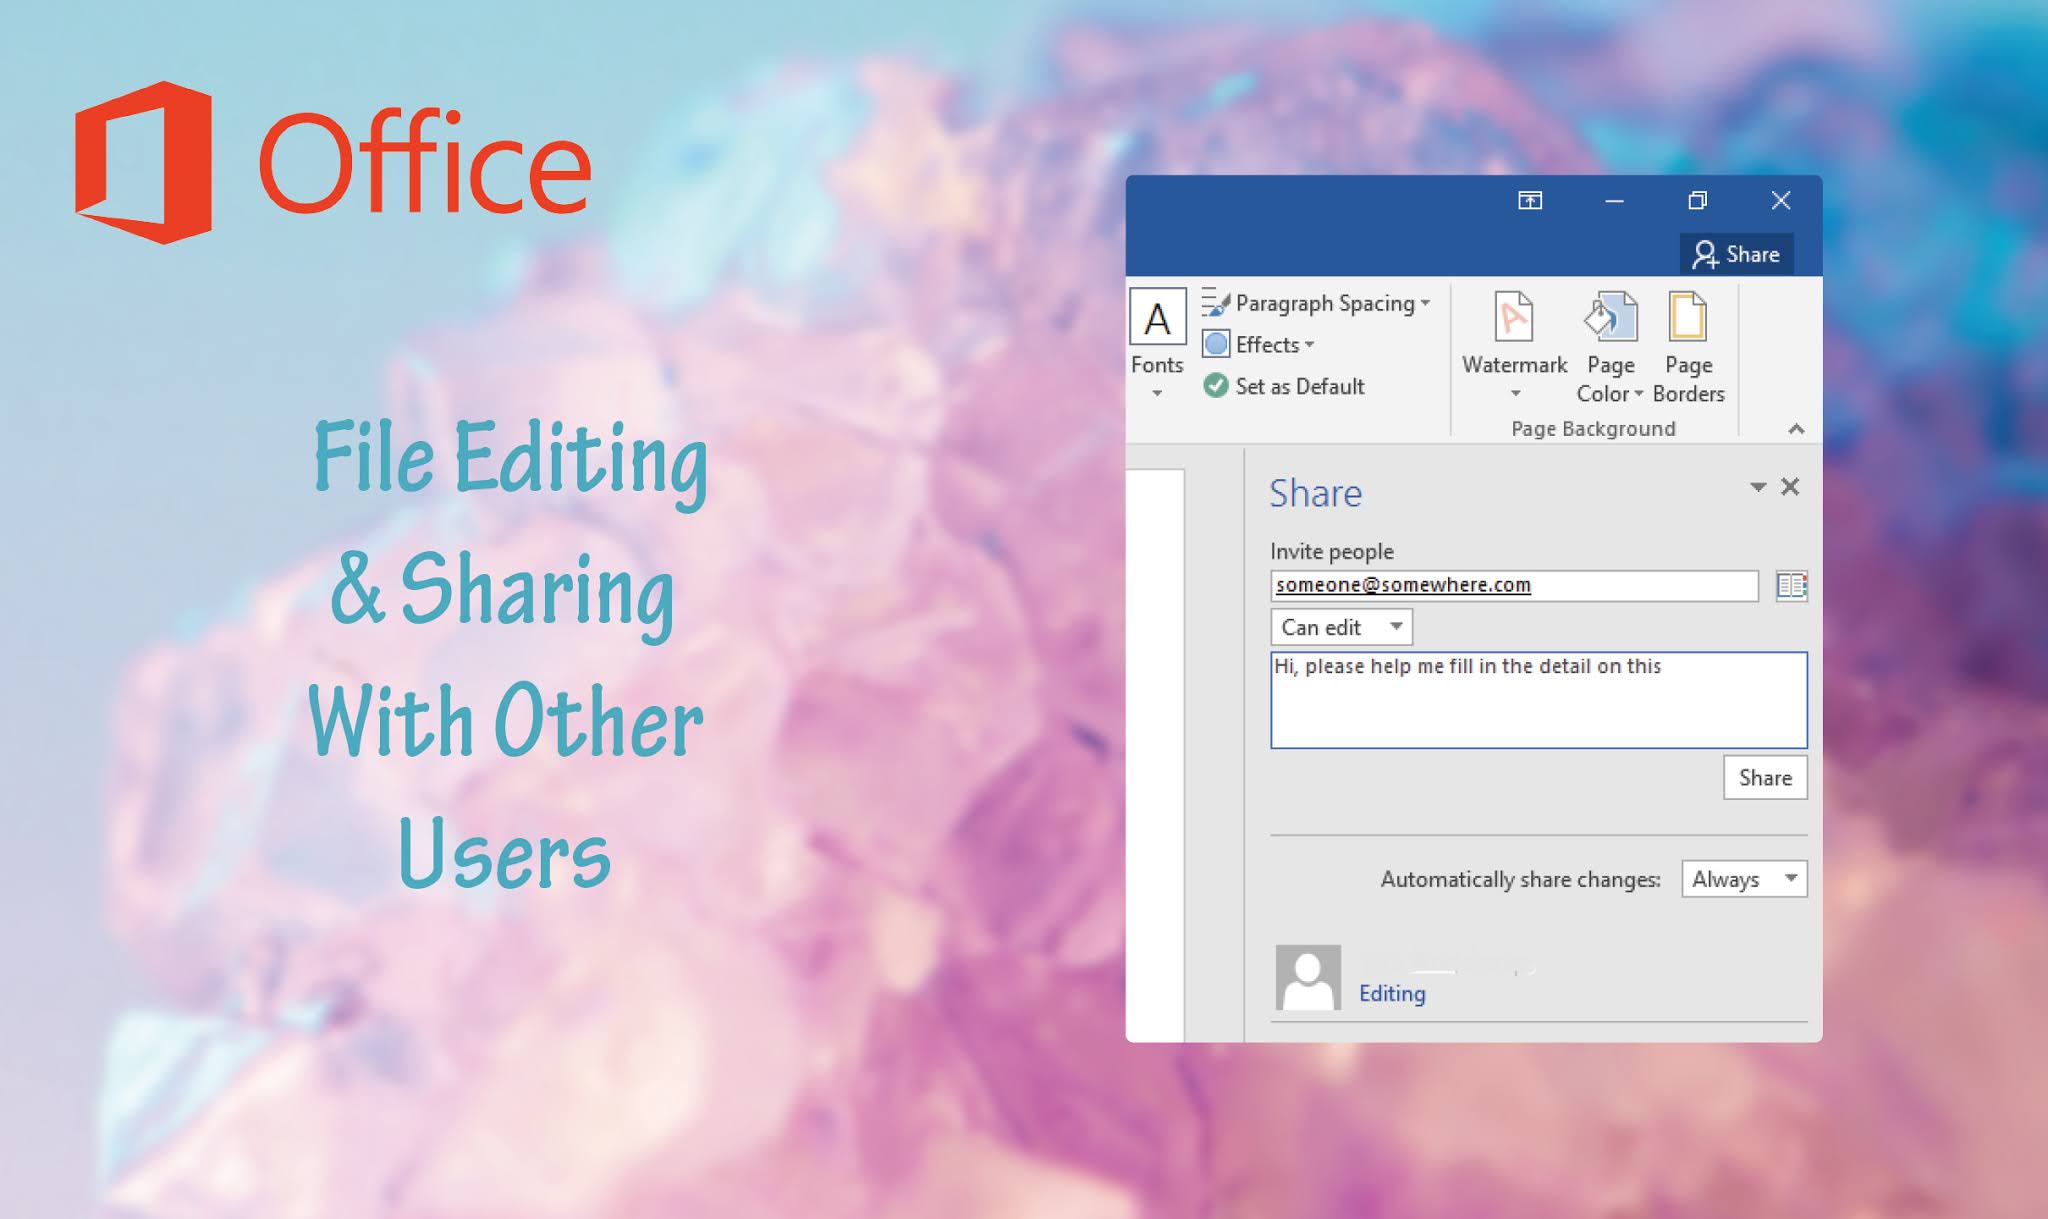 File editing and sharing with other users